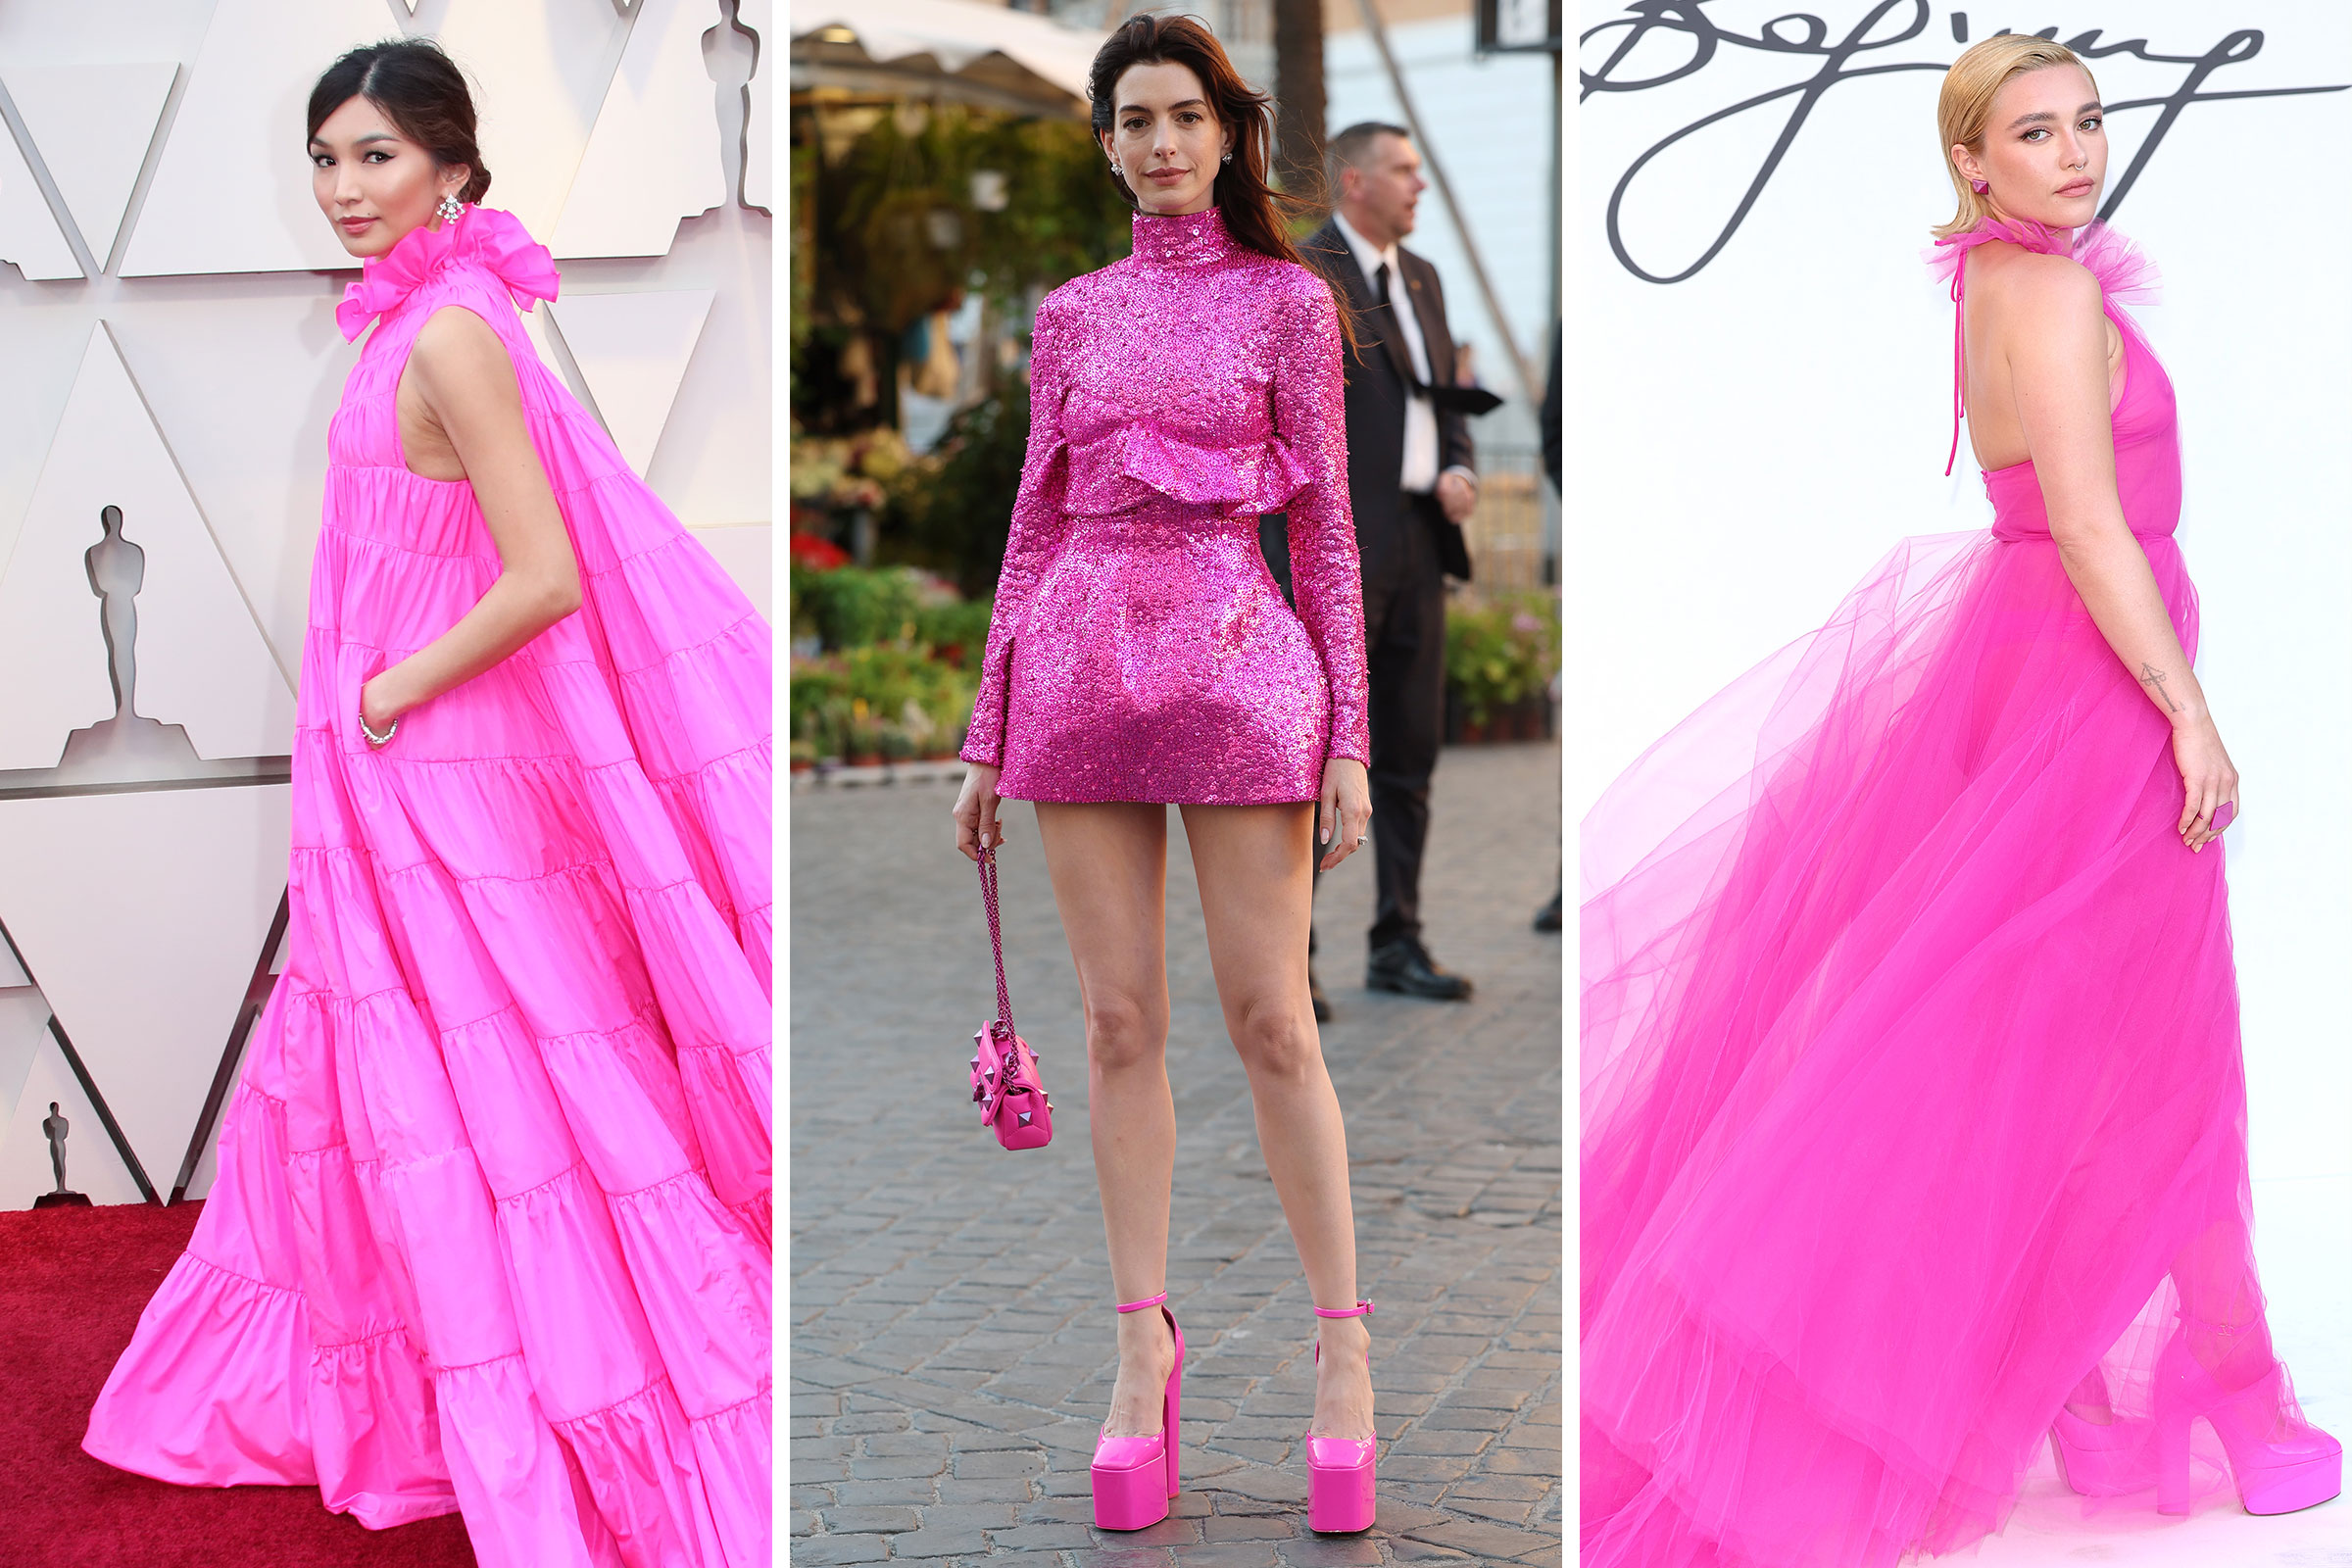 Gemma Chan; Anne Hathaway; Florence Pugh all wearing hot pink outfits to events